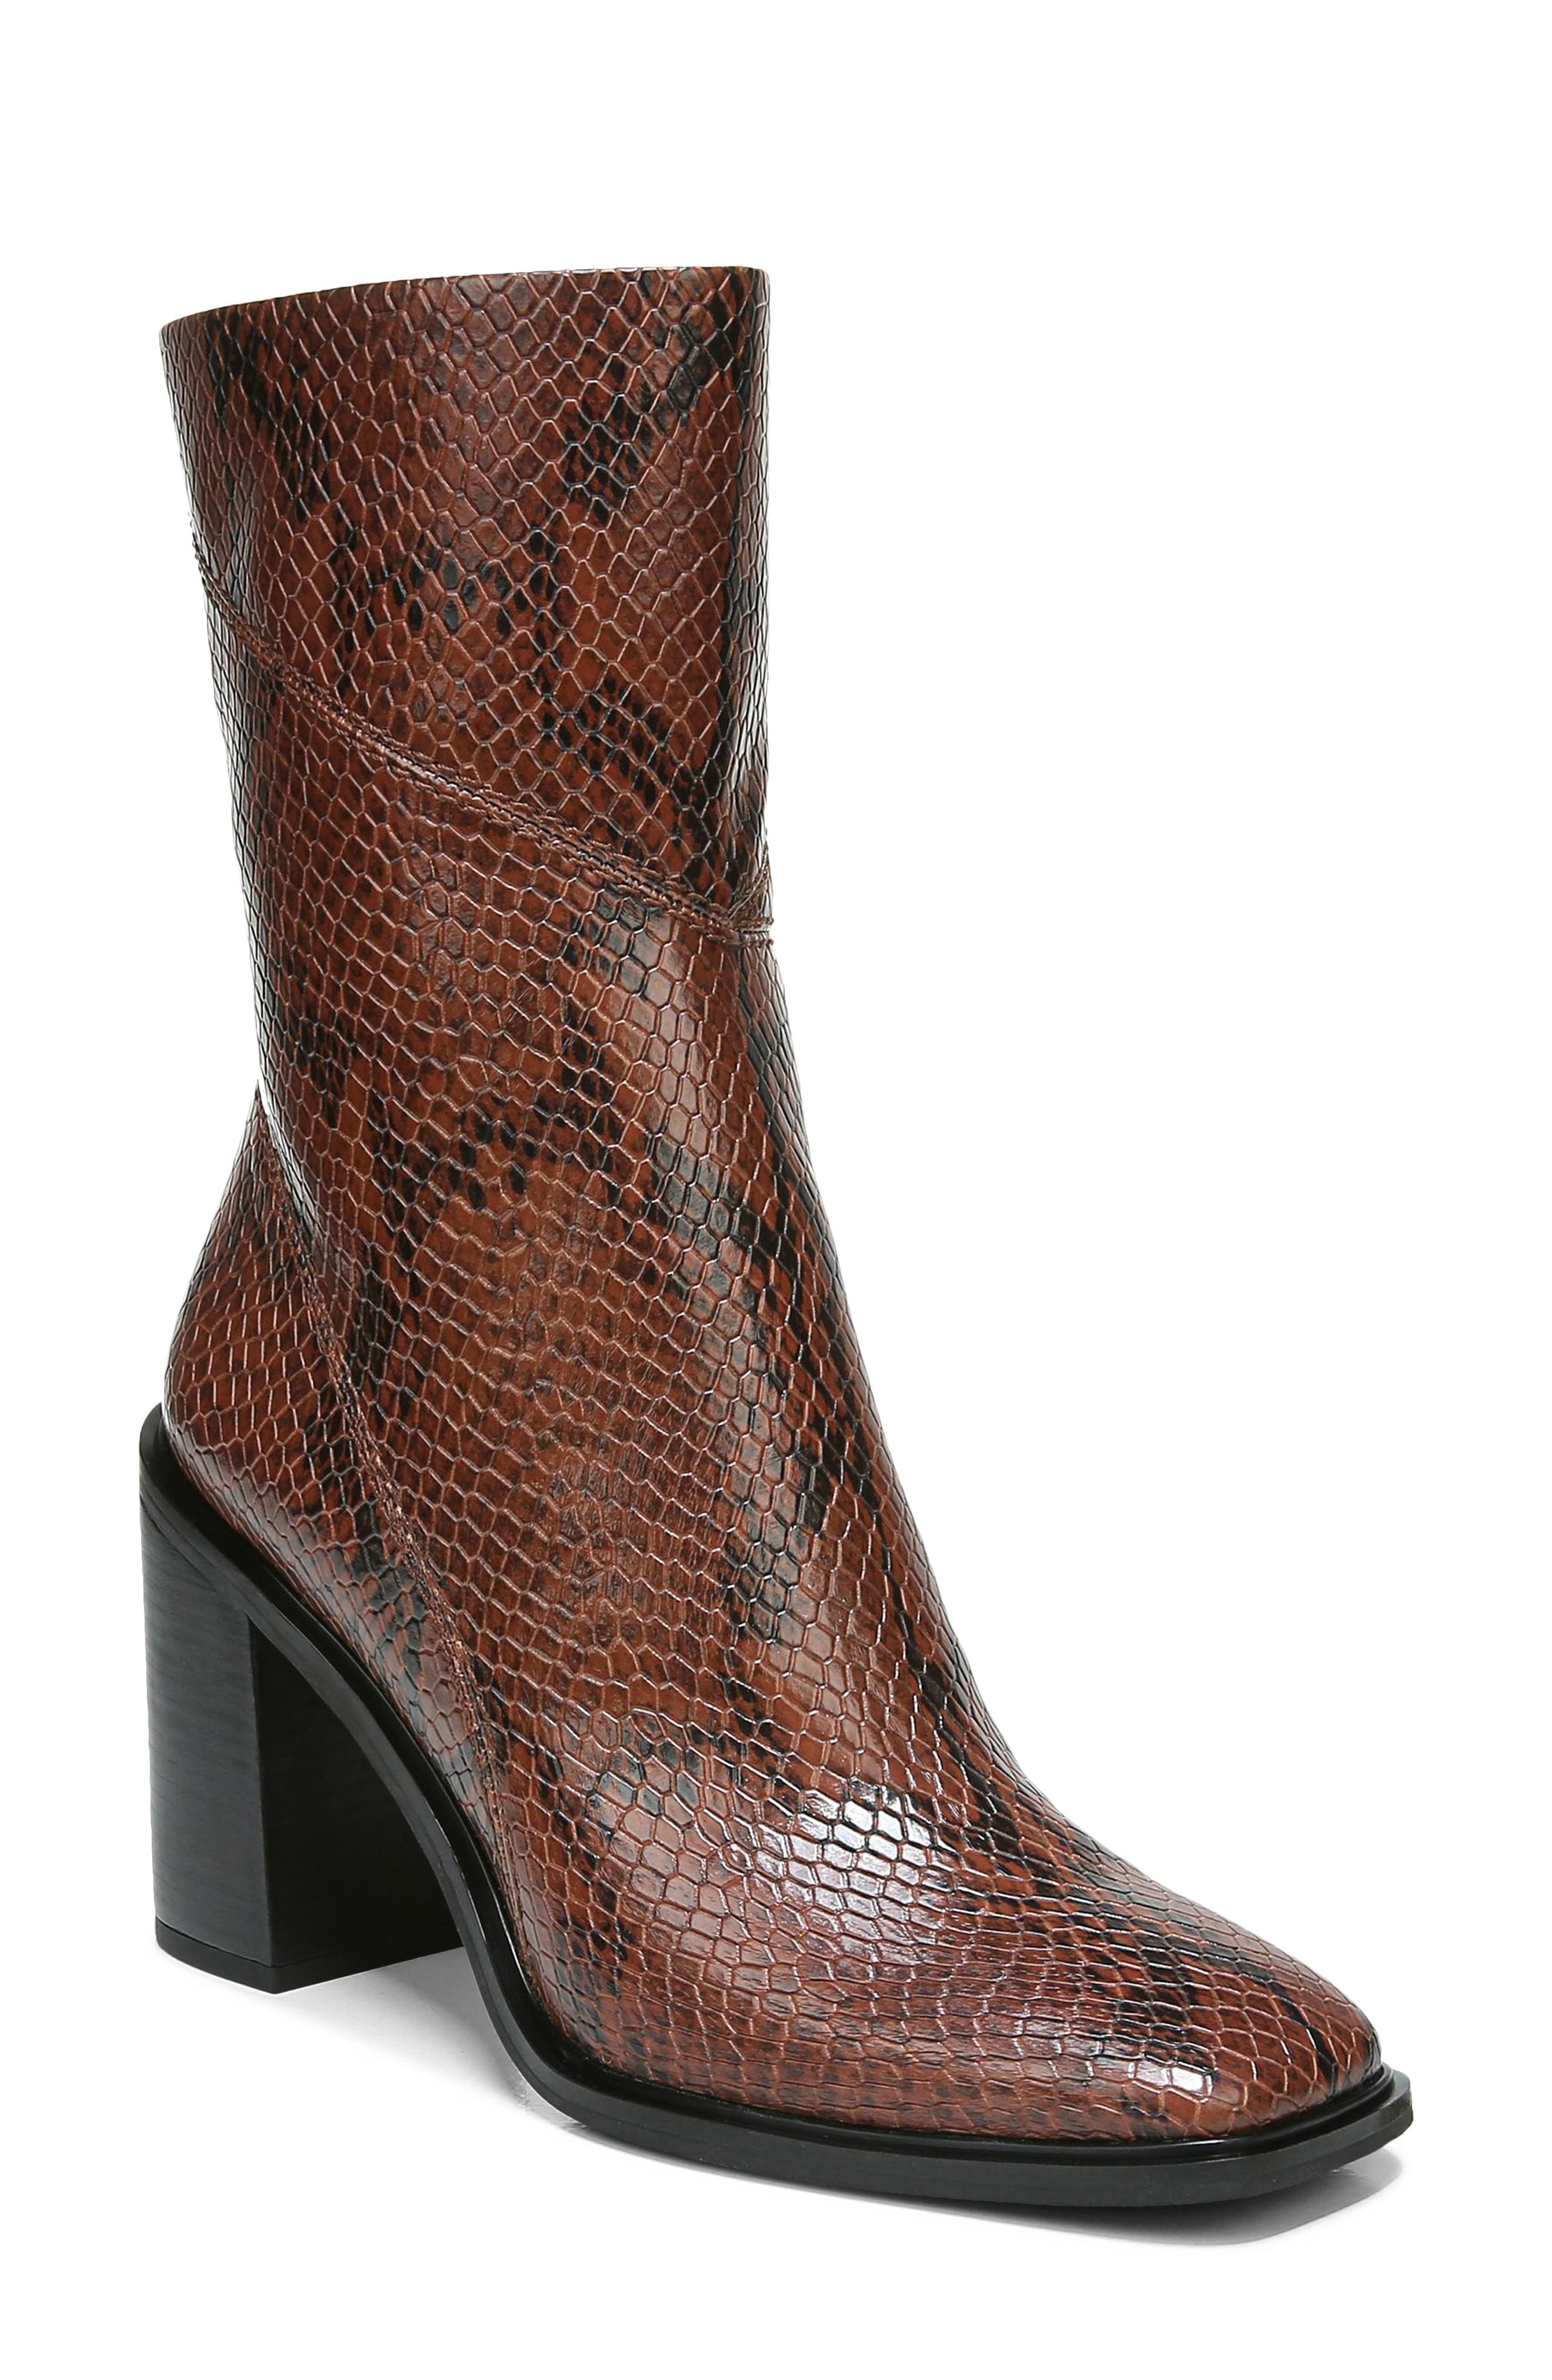 Franco Sarto Leather Stevie Bootie in Brown - Lyst